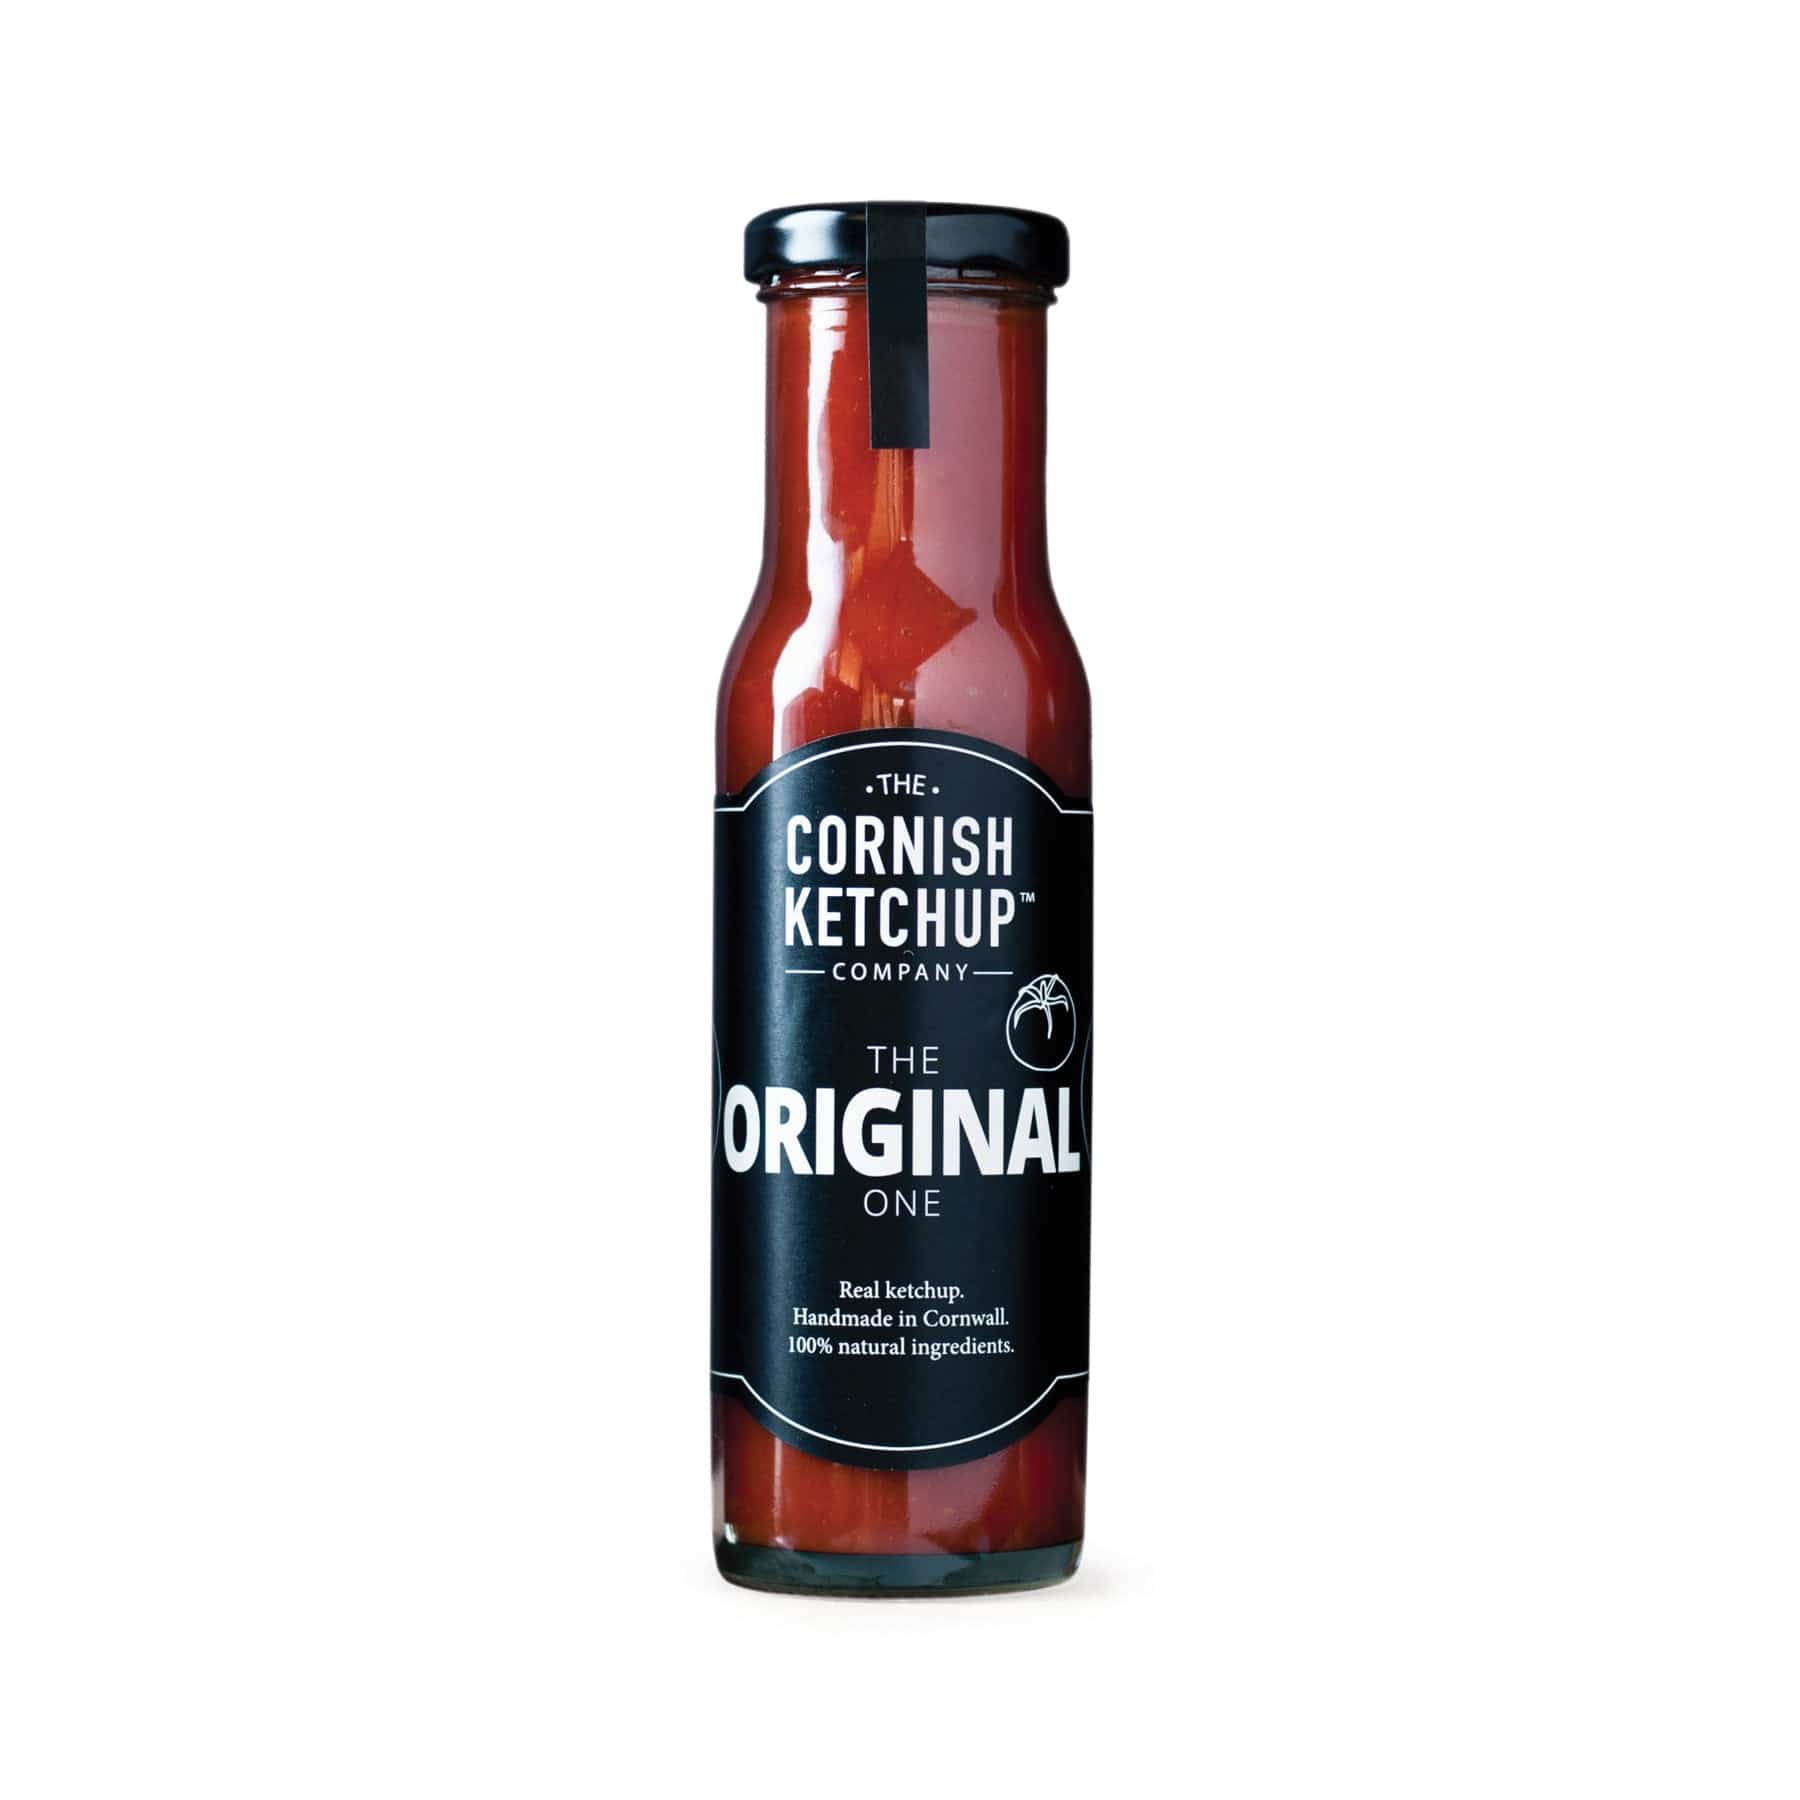 Cornish Ketchup Company bottle, The Original One, Real Ketchup Handmade in Cornwall with 100% natural ingredients, isolated on white background.